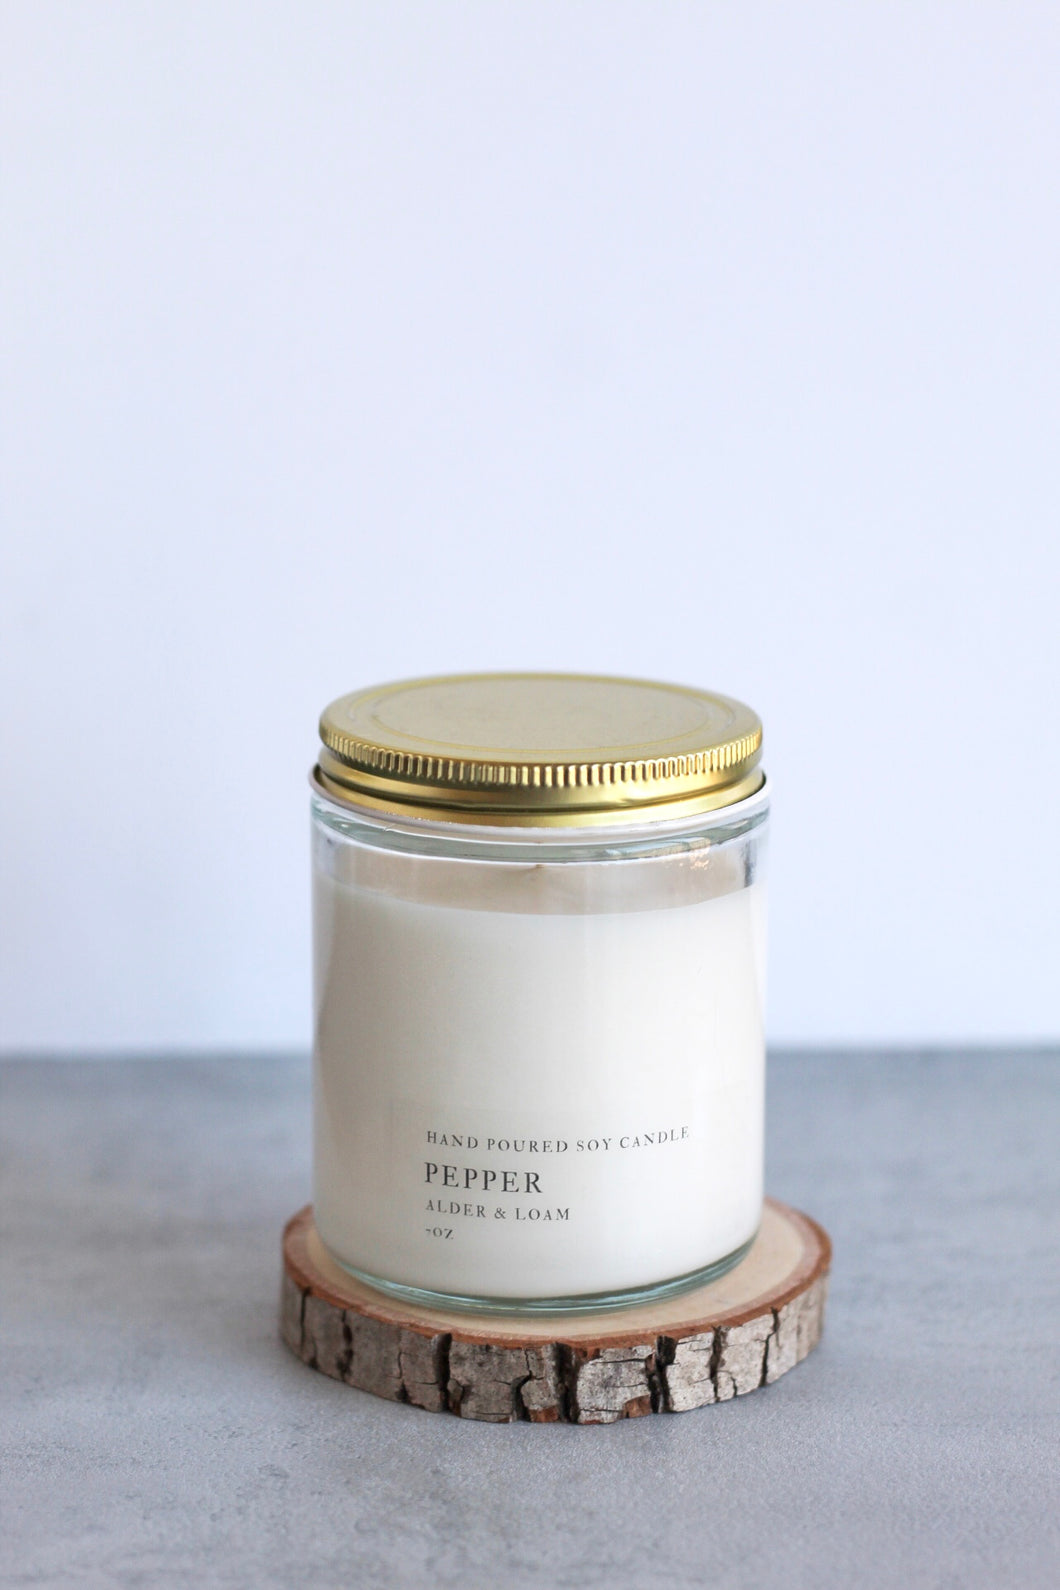 Pepper Soy Candle, Hand Poured, Natural, Eco Friendly, Earthy Scent, 7 oz Jar